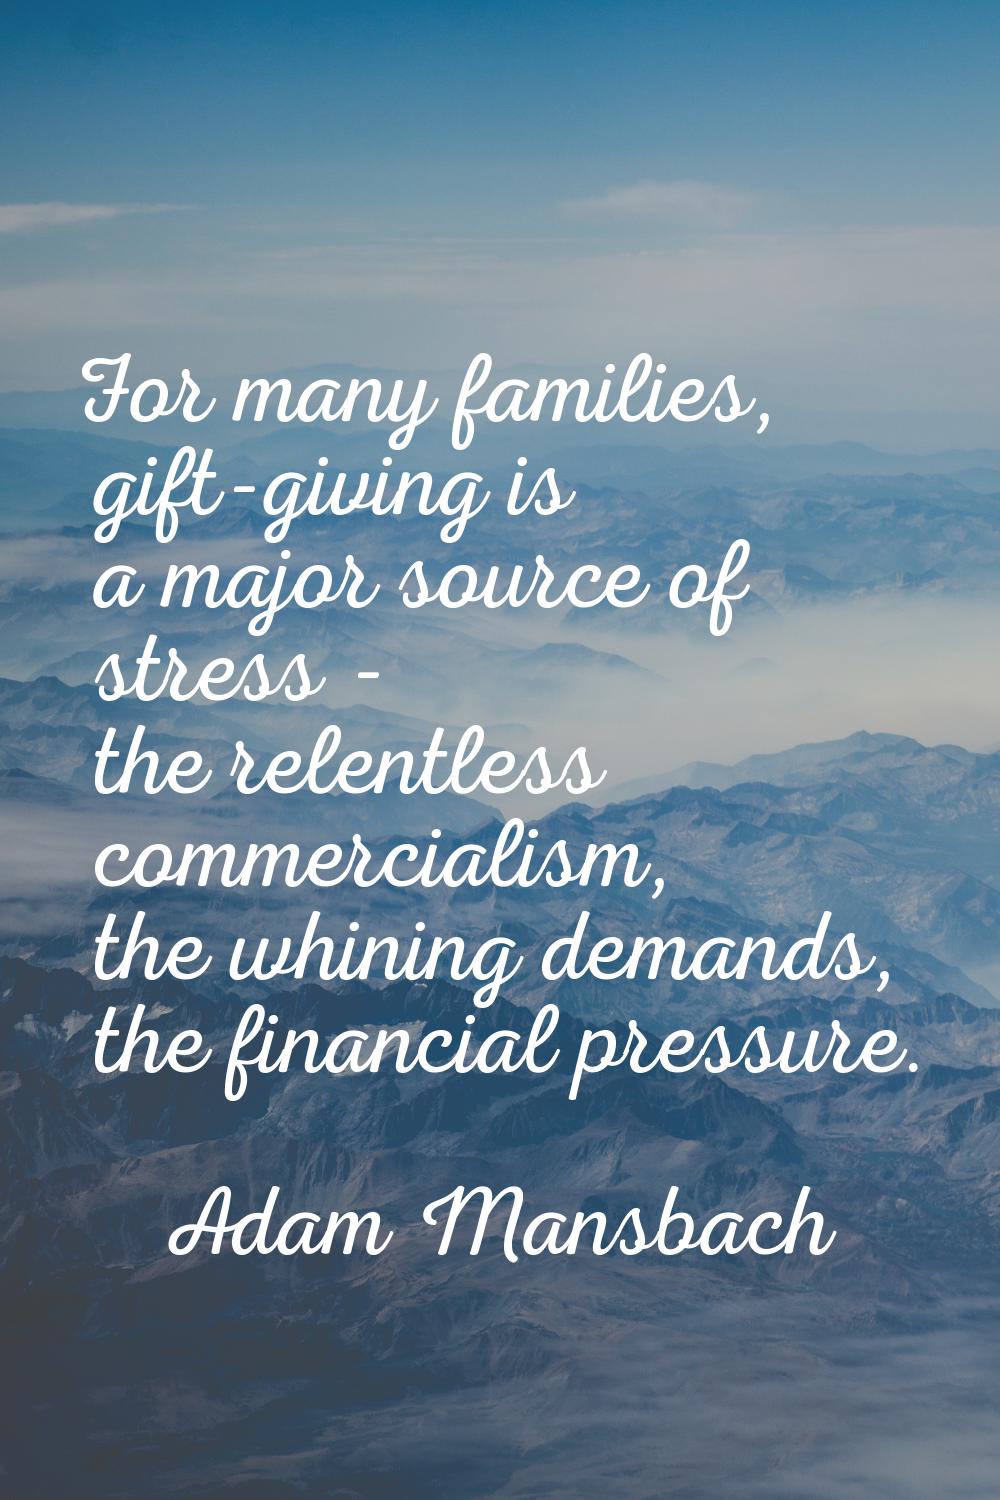 For many families, gift-giving is a major source of stress - the relentless commercialism, the whin